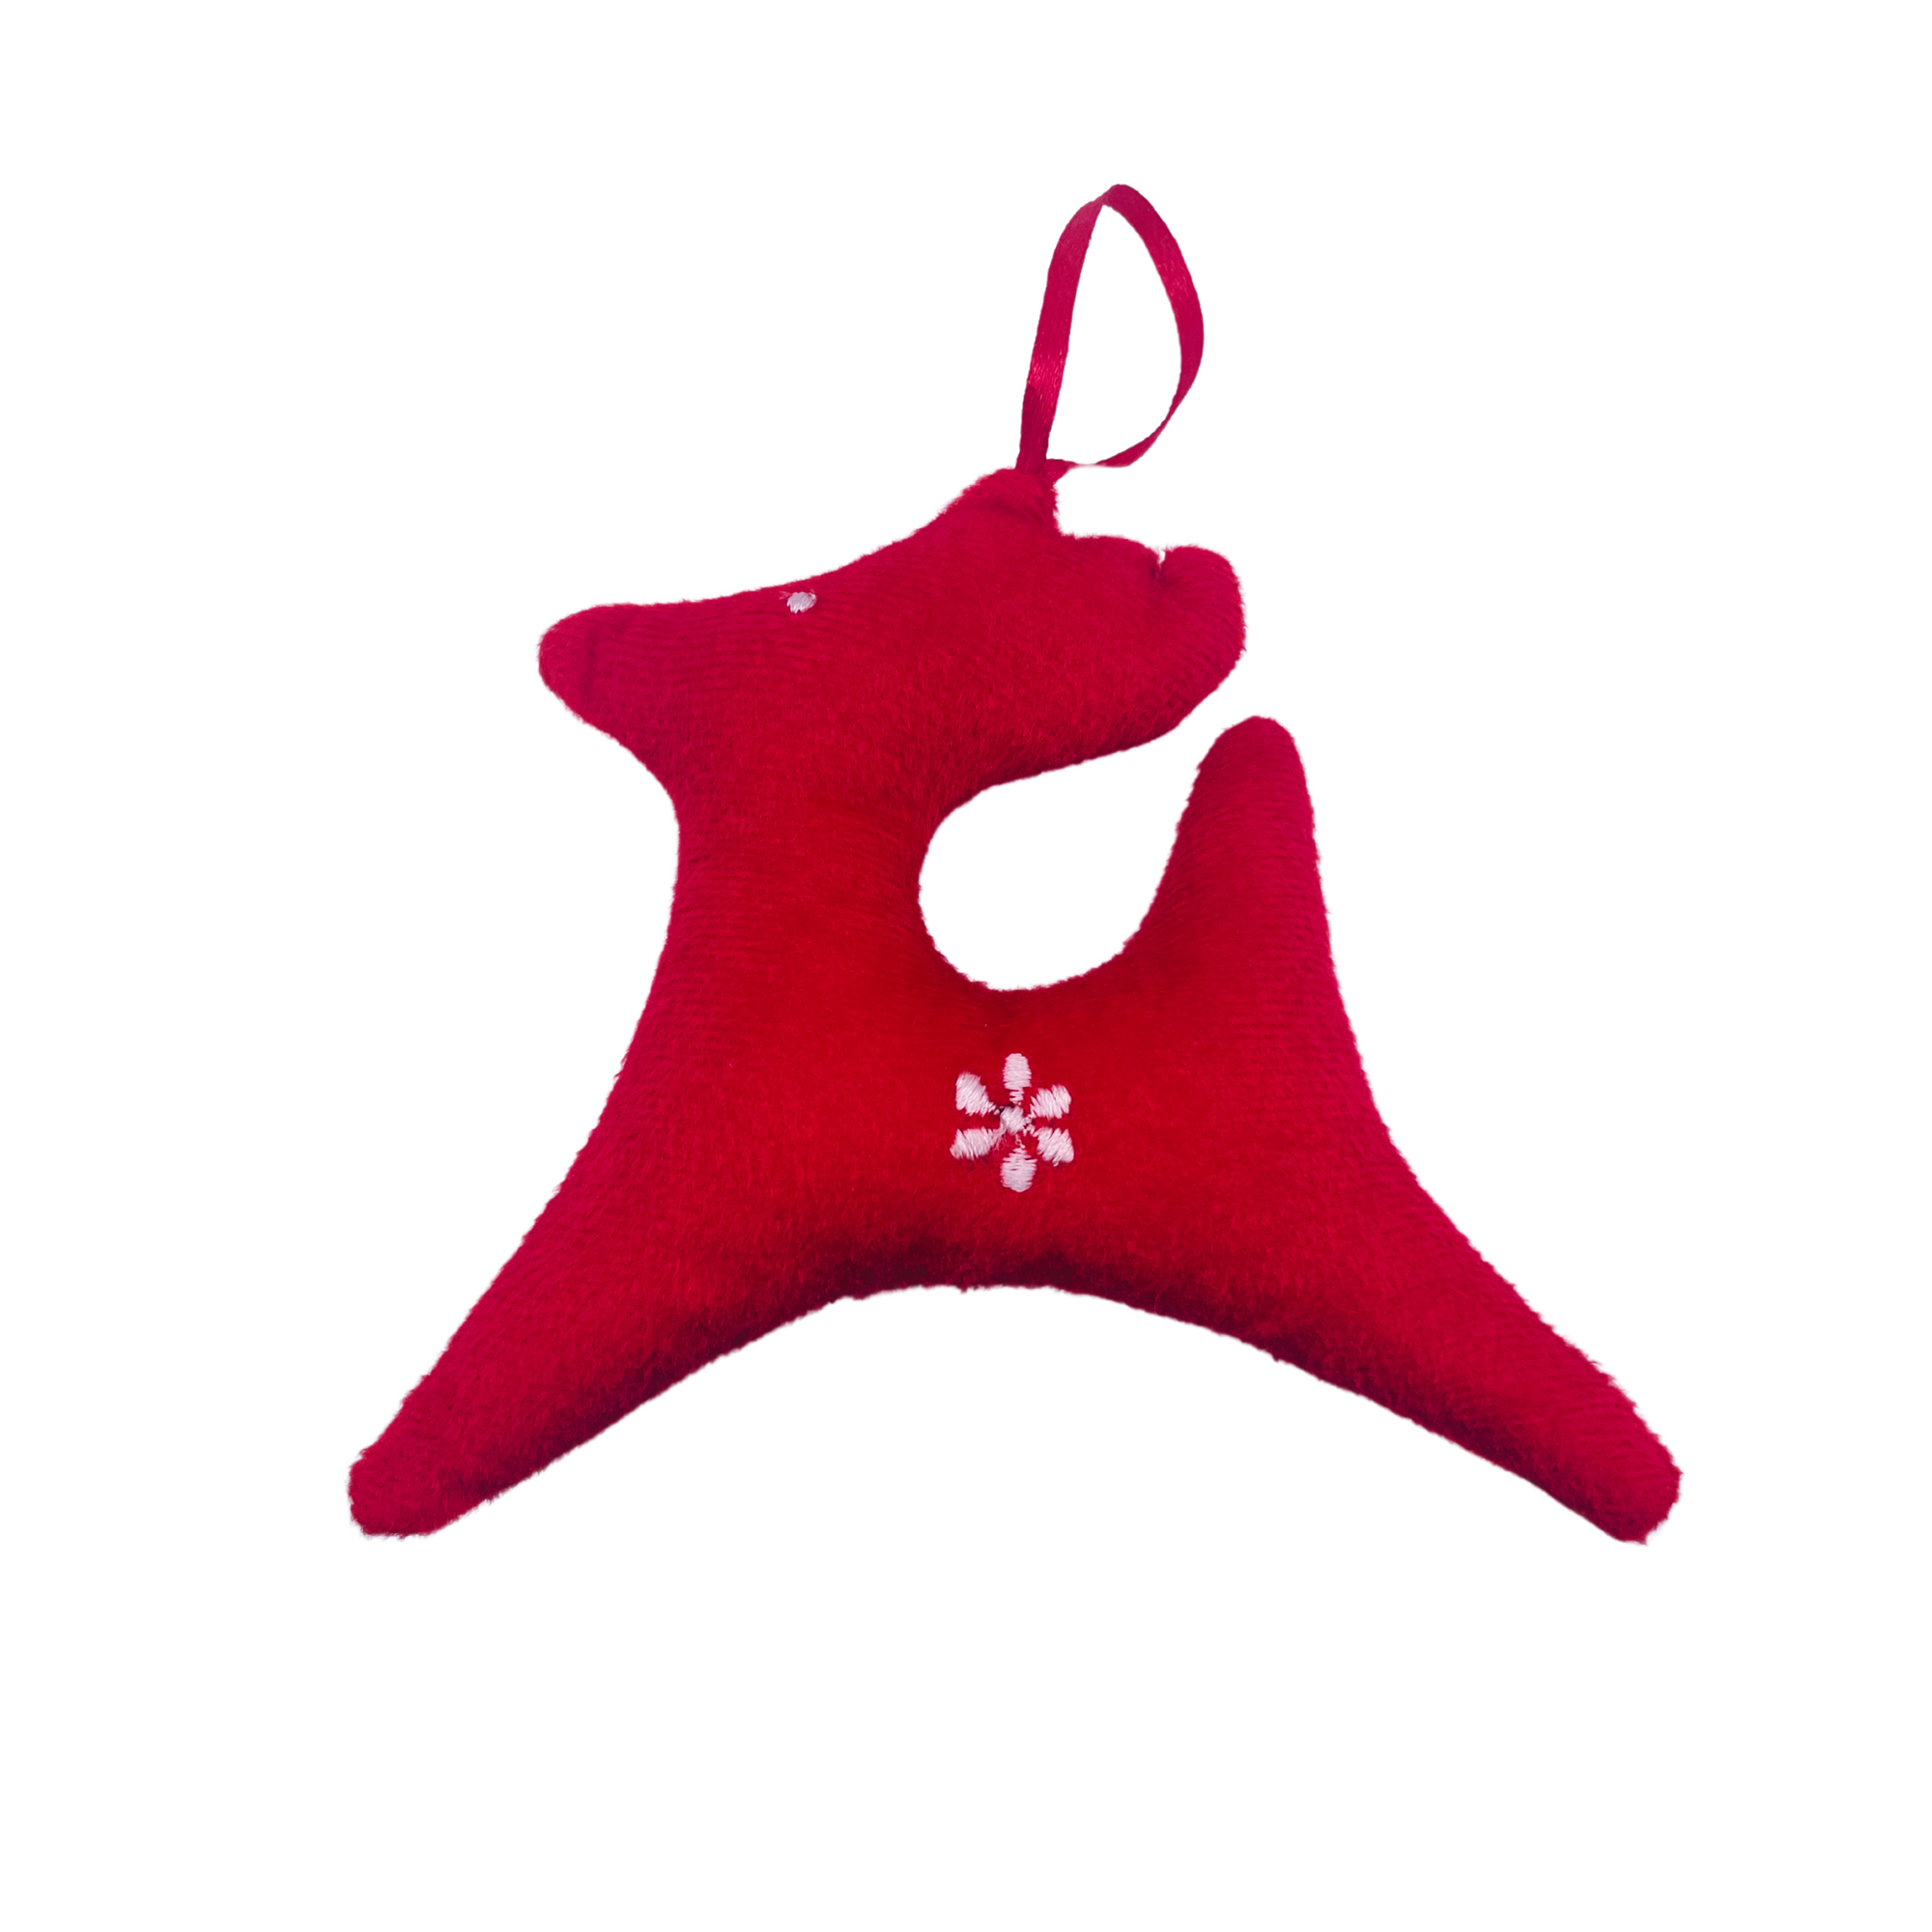 Kiyome Hanging Red Fabric Reindeer Decoration 12 x 11cm